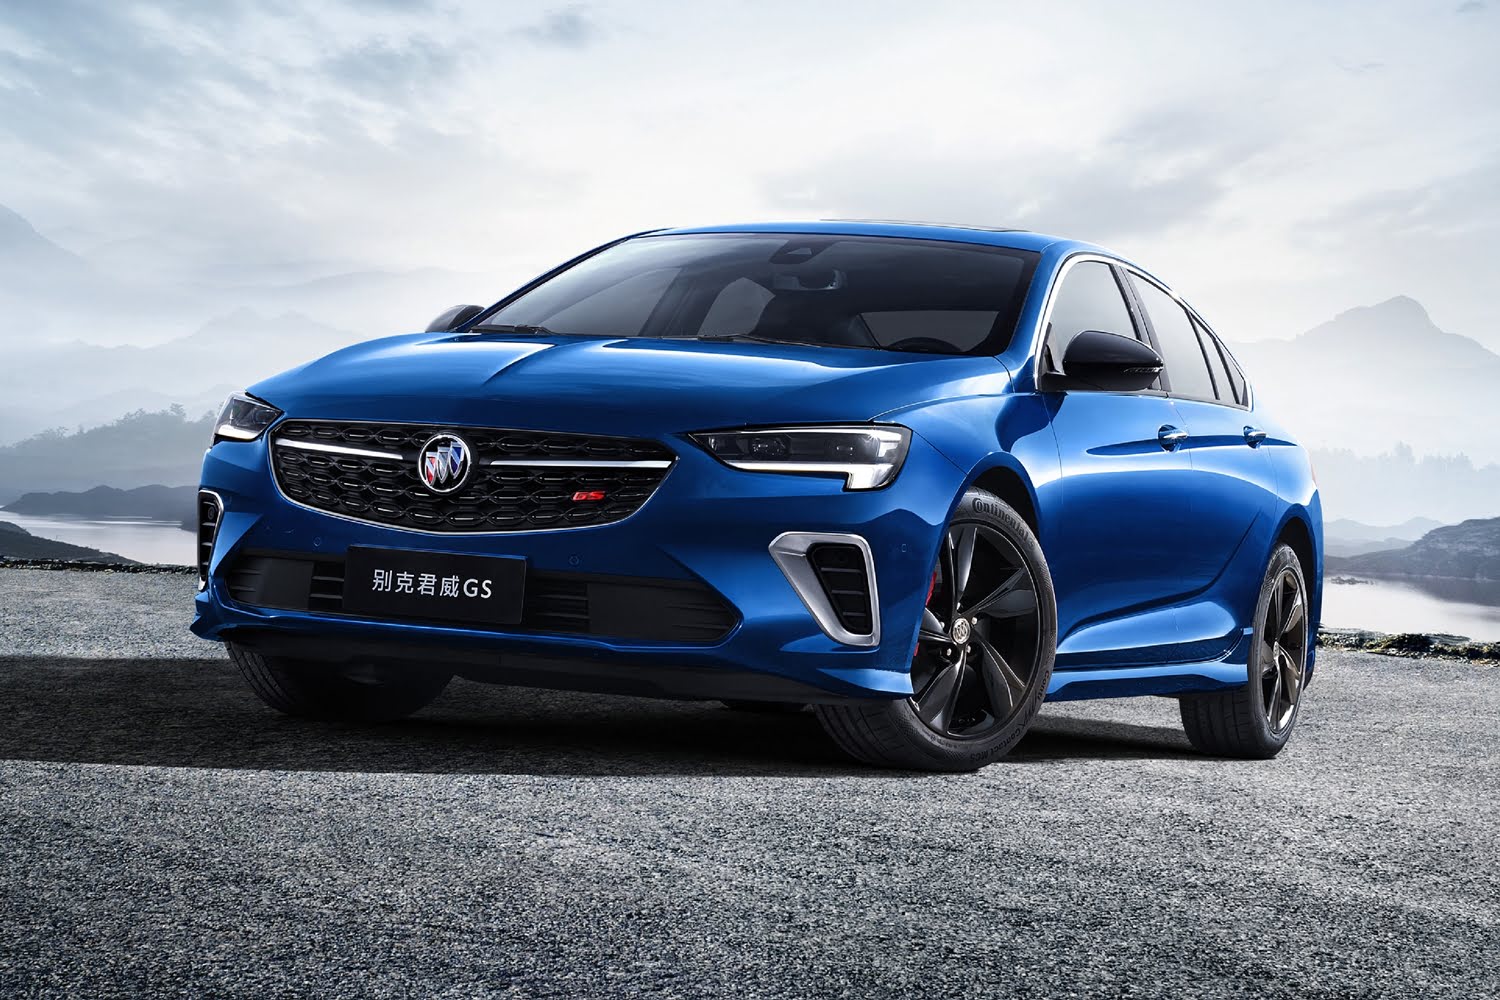 GM hot rods: Chevy Aveo RS and Buick Regal GS (photos) - CNET